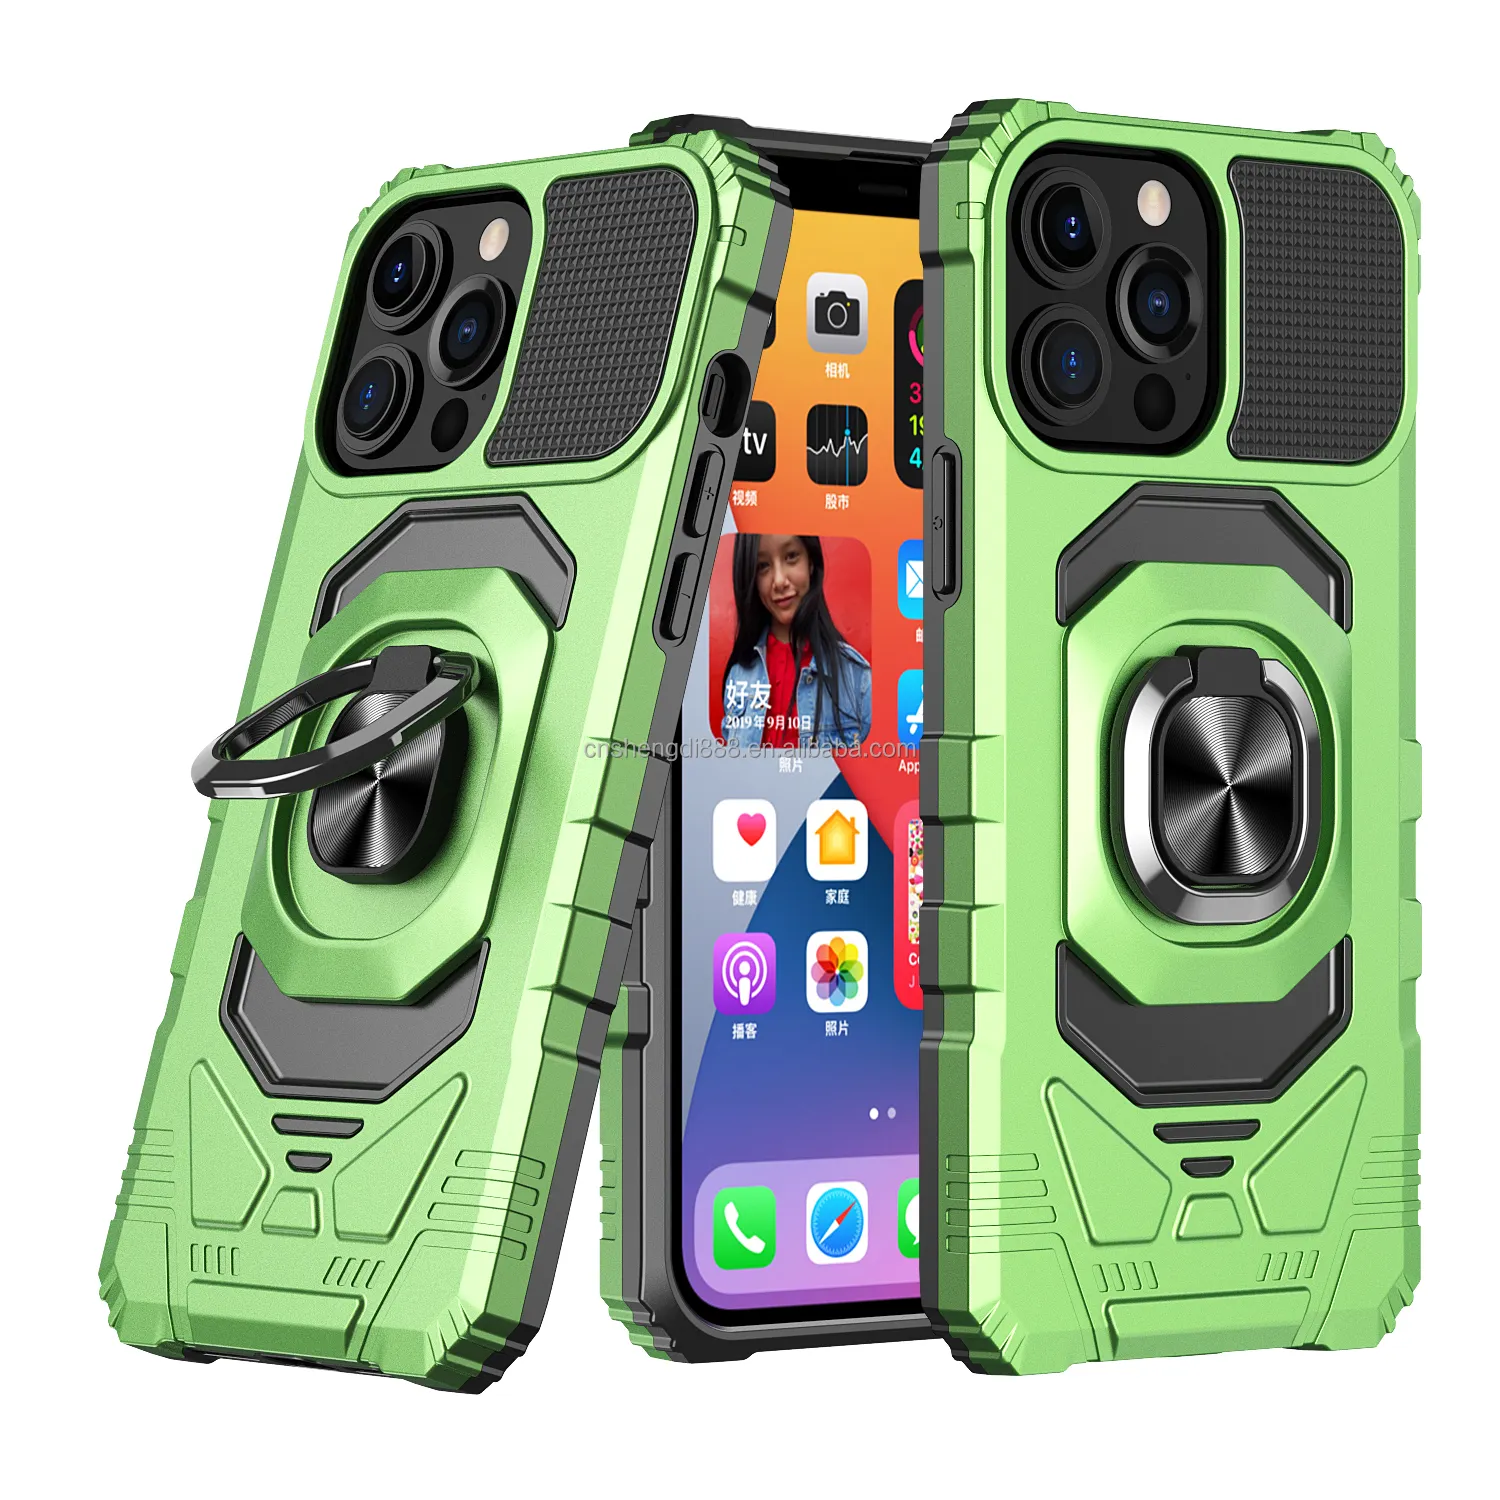 iphone skins cases